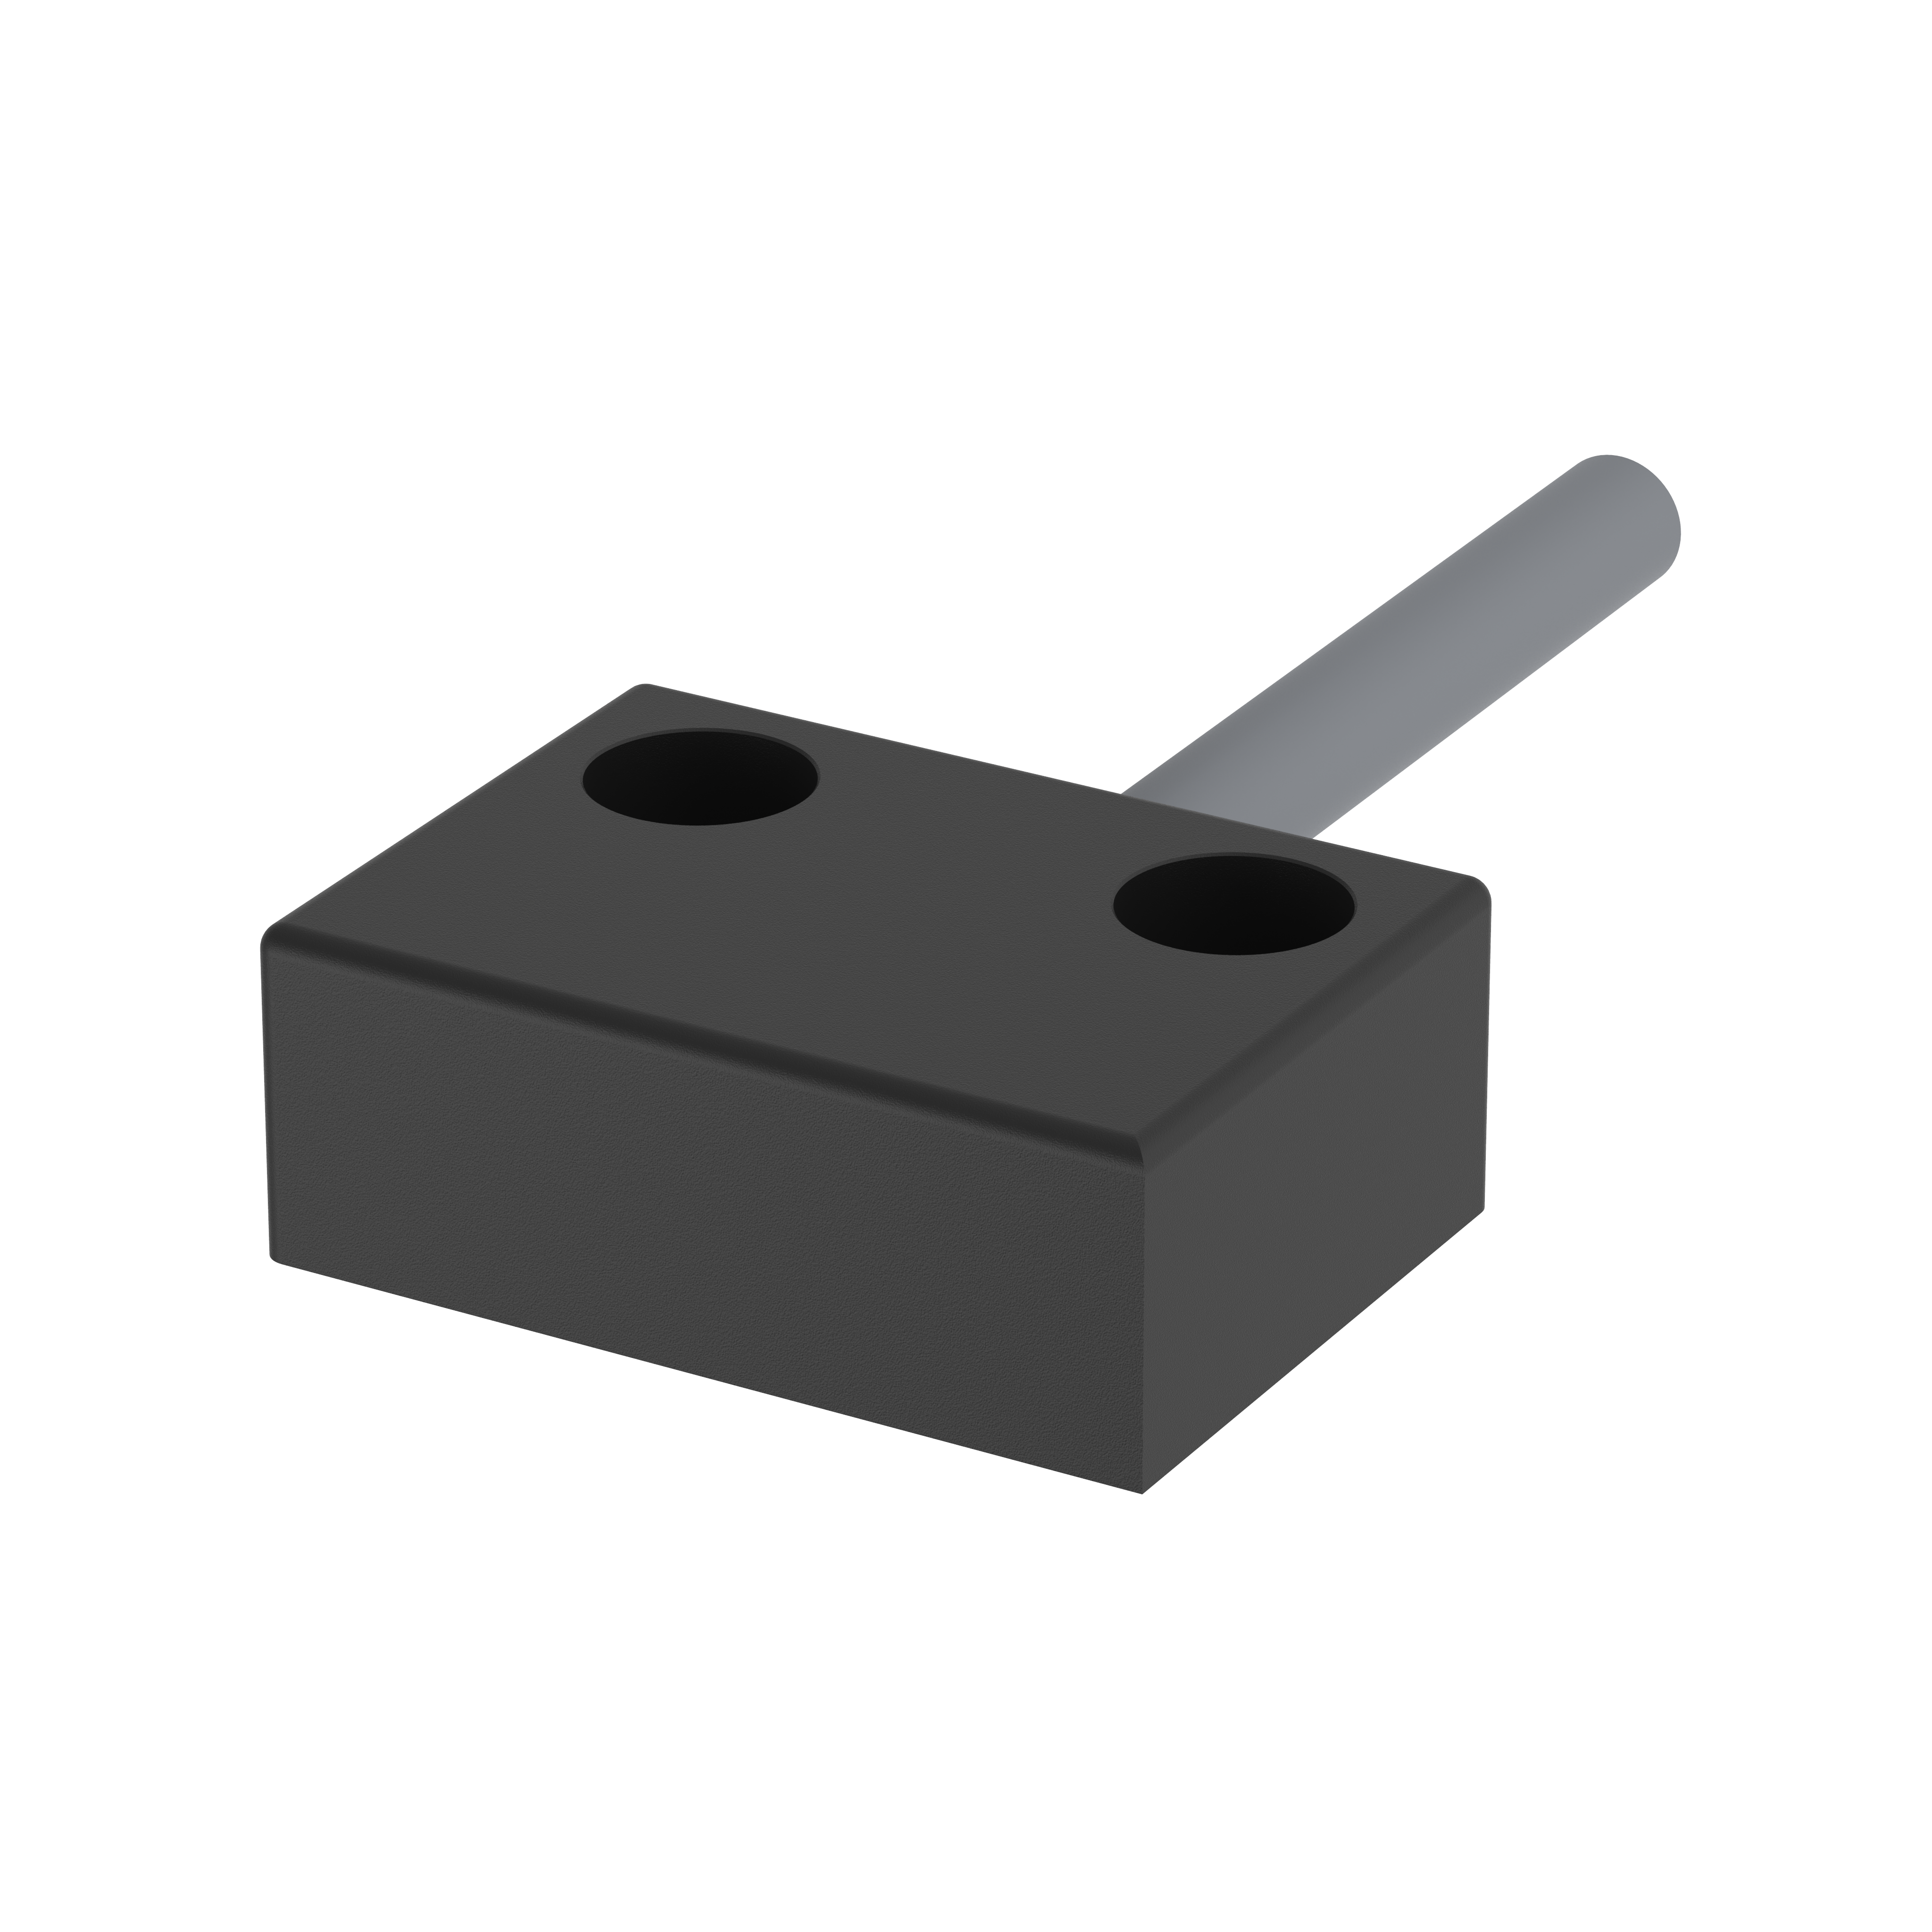 Proximity switches - magnetic sensor - 153230-3 - changeover, 3m PVC cable